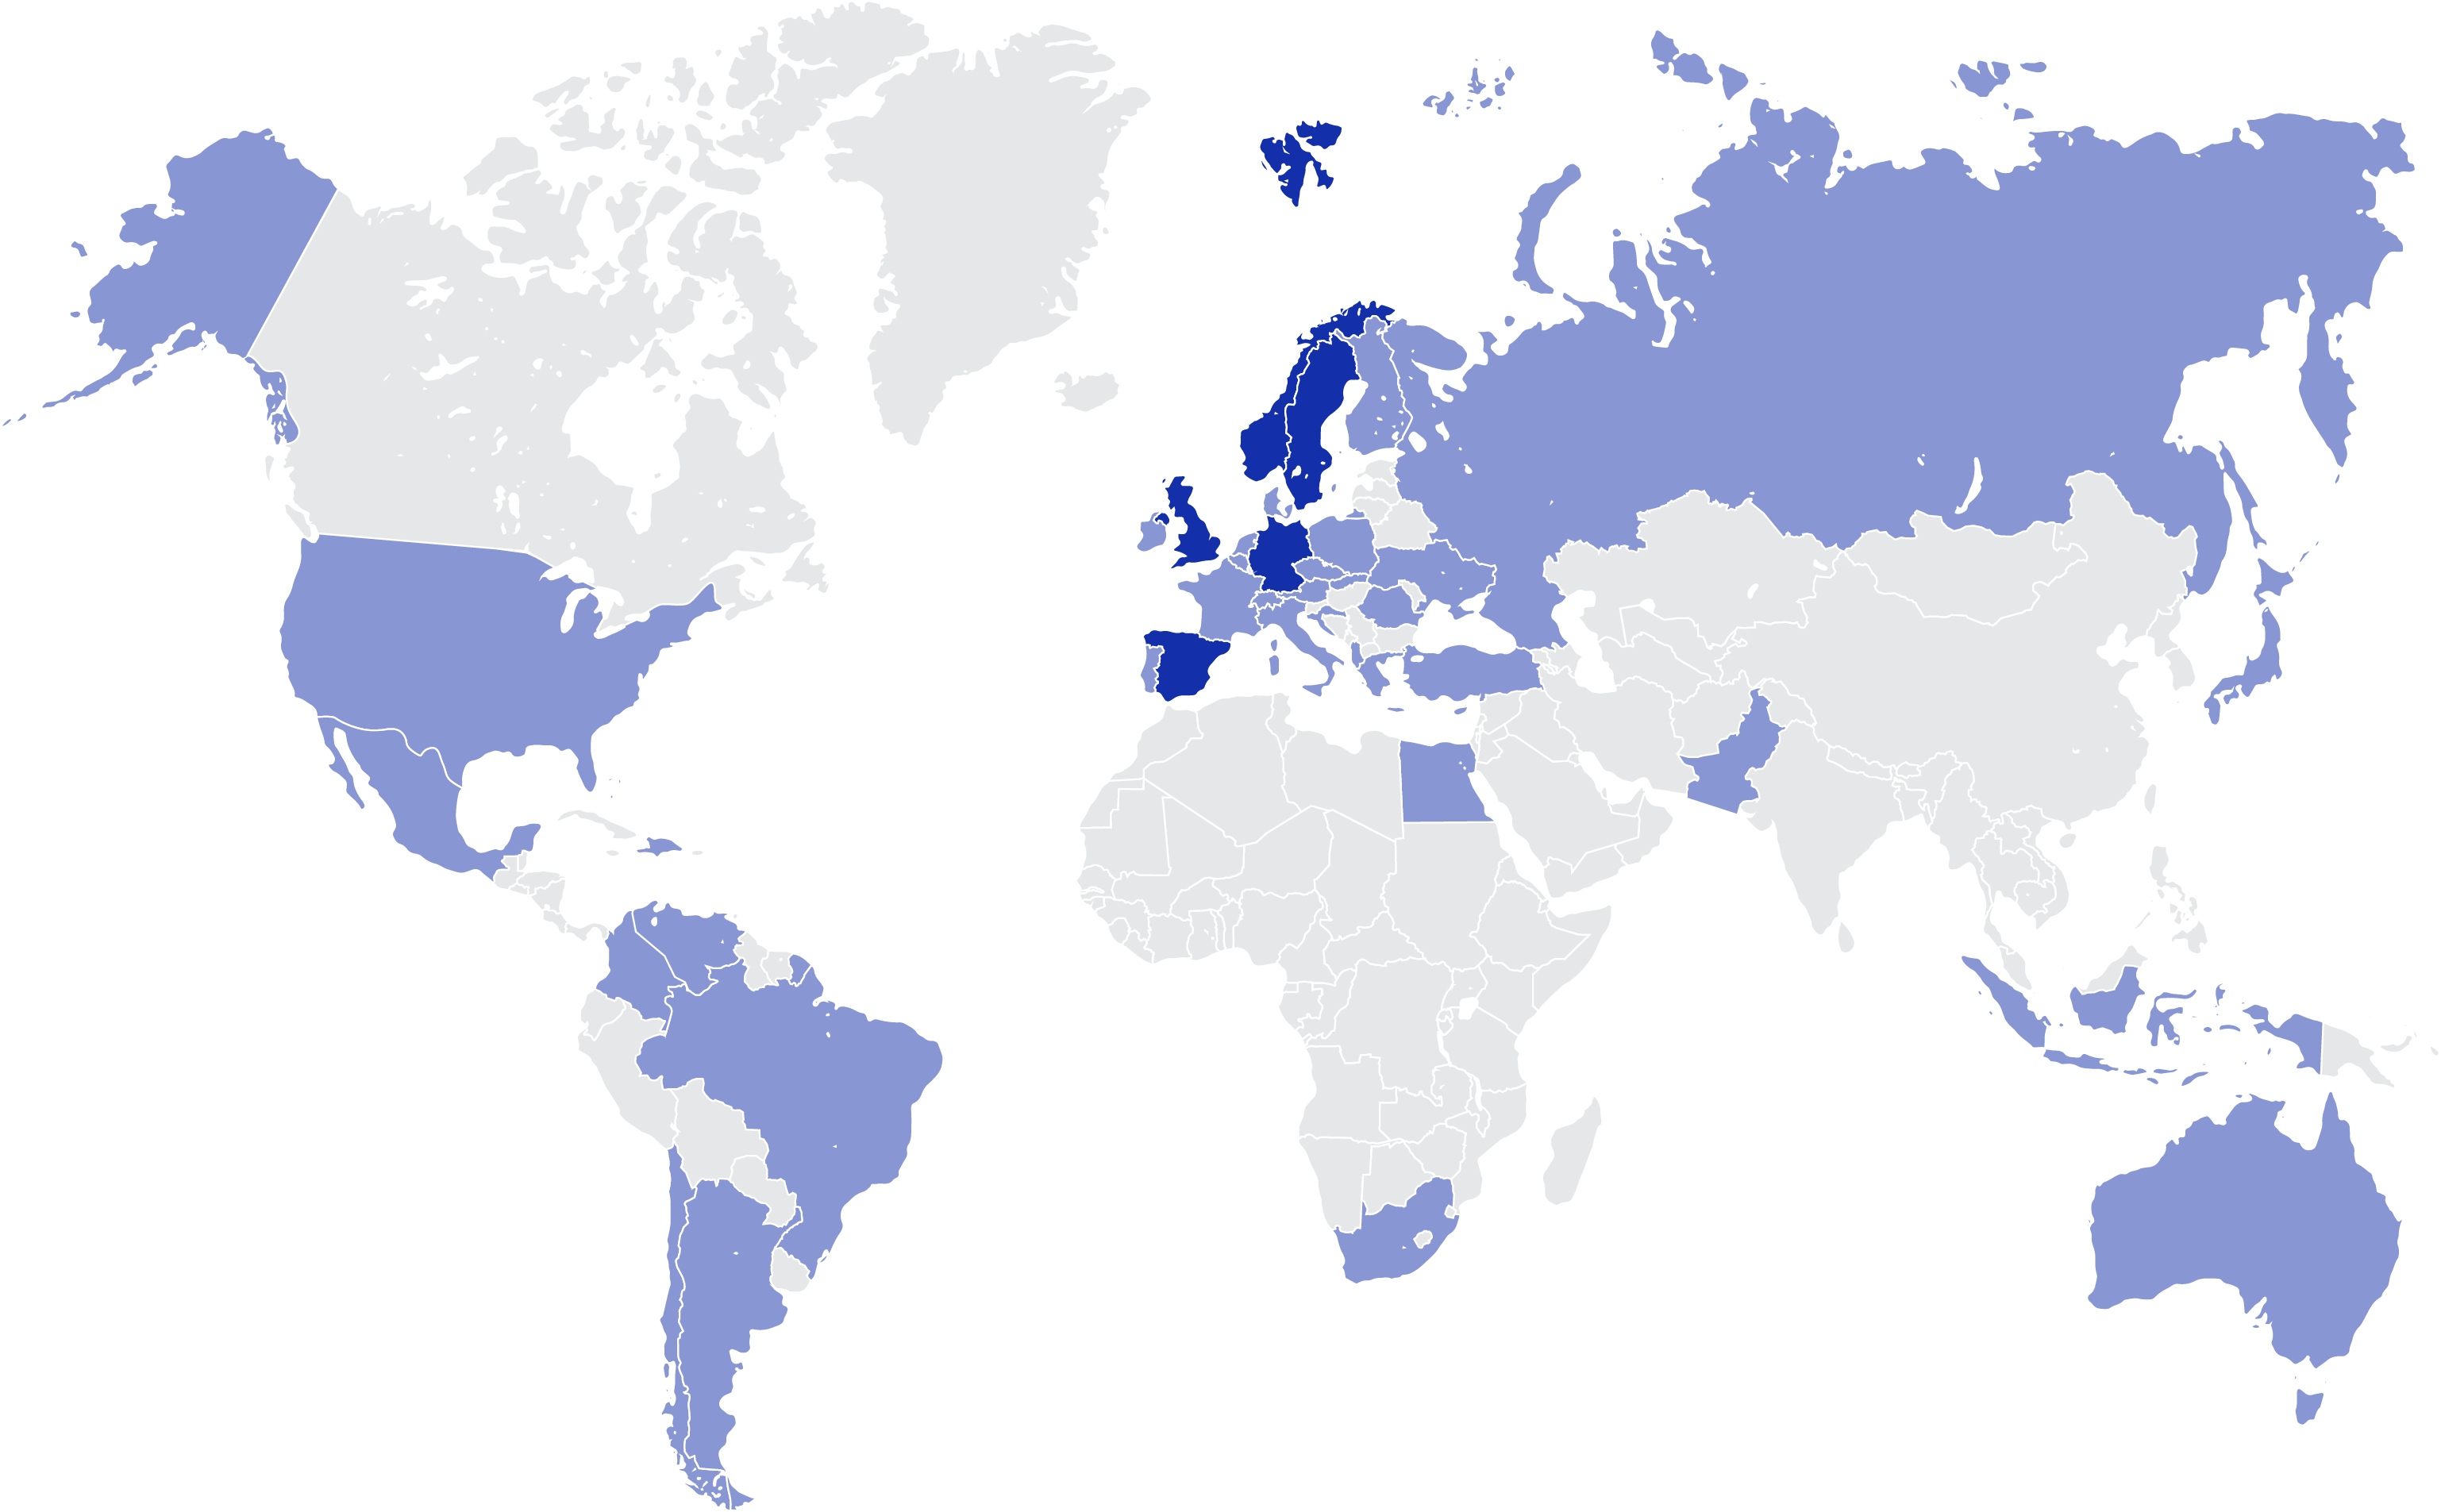 Map of the world, showing all the countries that Keystone Sports operate in.